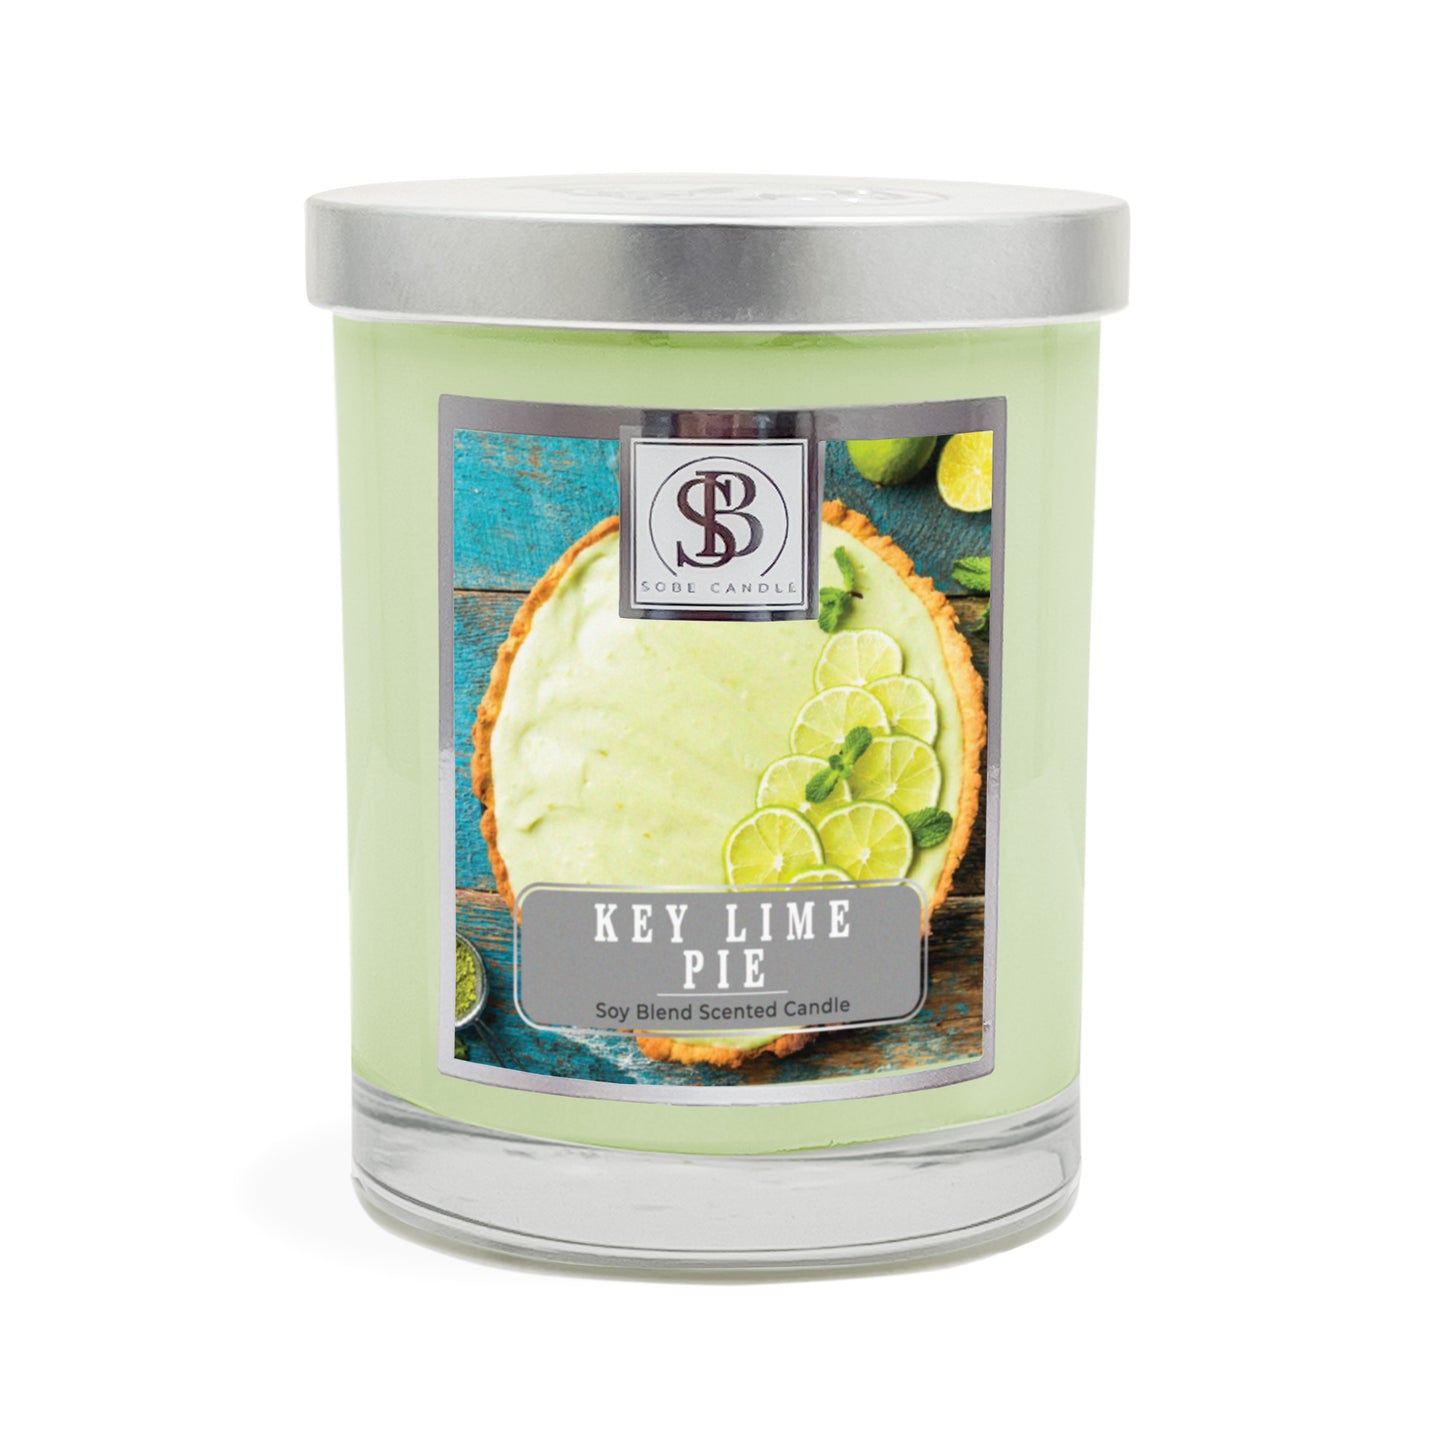 KEY LIME PIE | Soy Scented Candle 11 oz